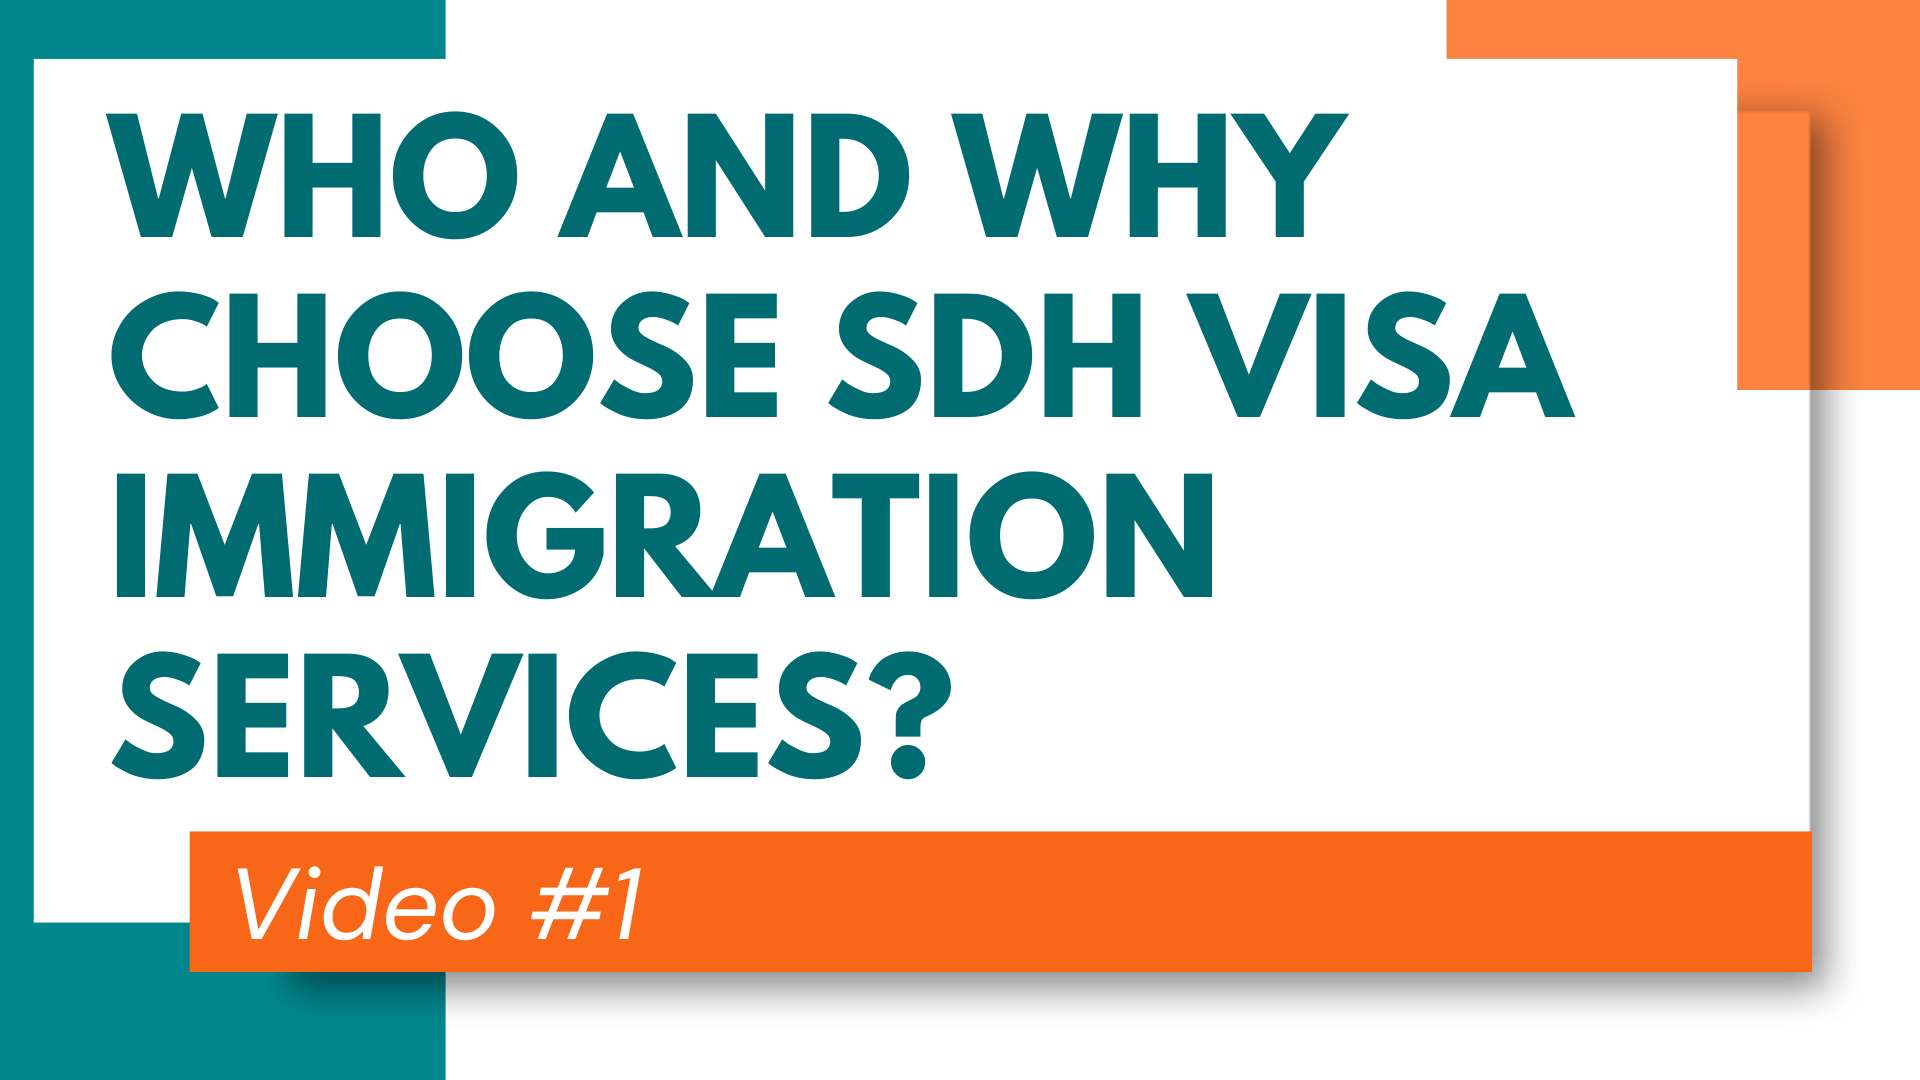 1. Who and Why choose SDH Immigration Services?